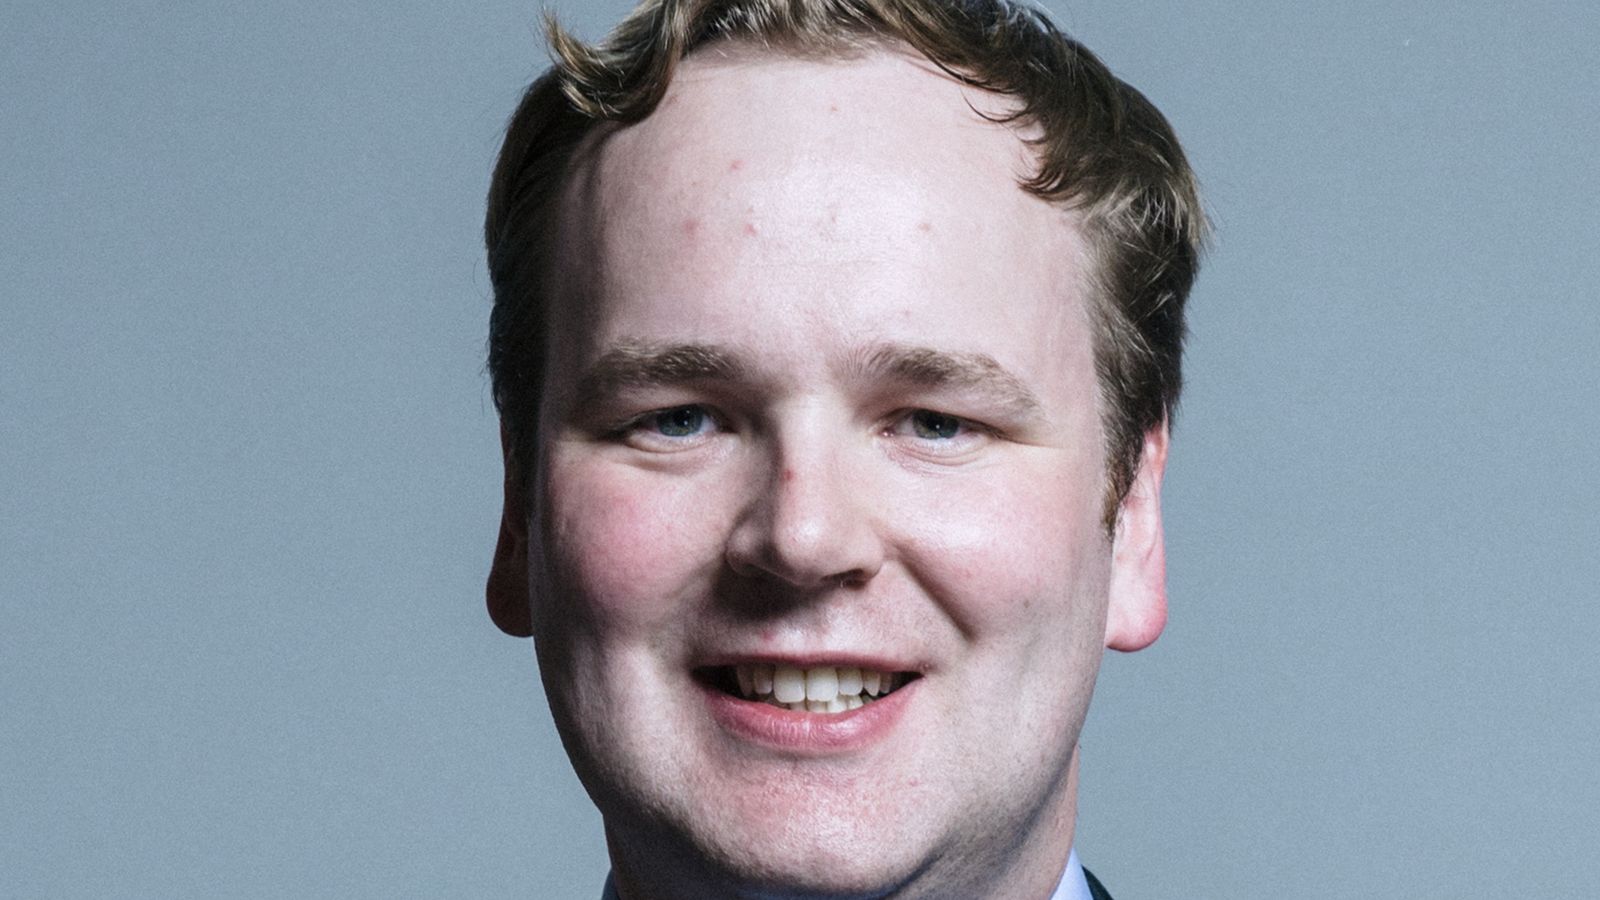 William Wragg: MP at centre of Westminster sexting scandal gives up Tory whip, party says